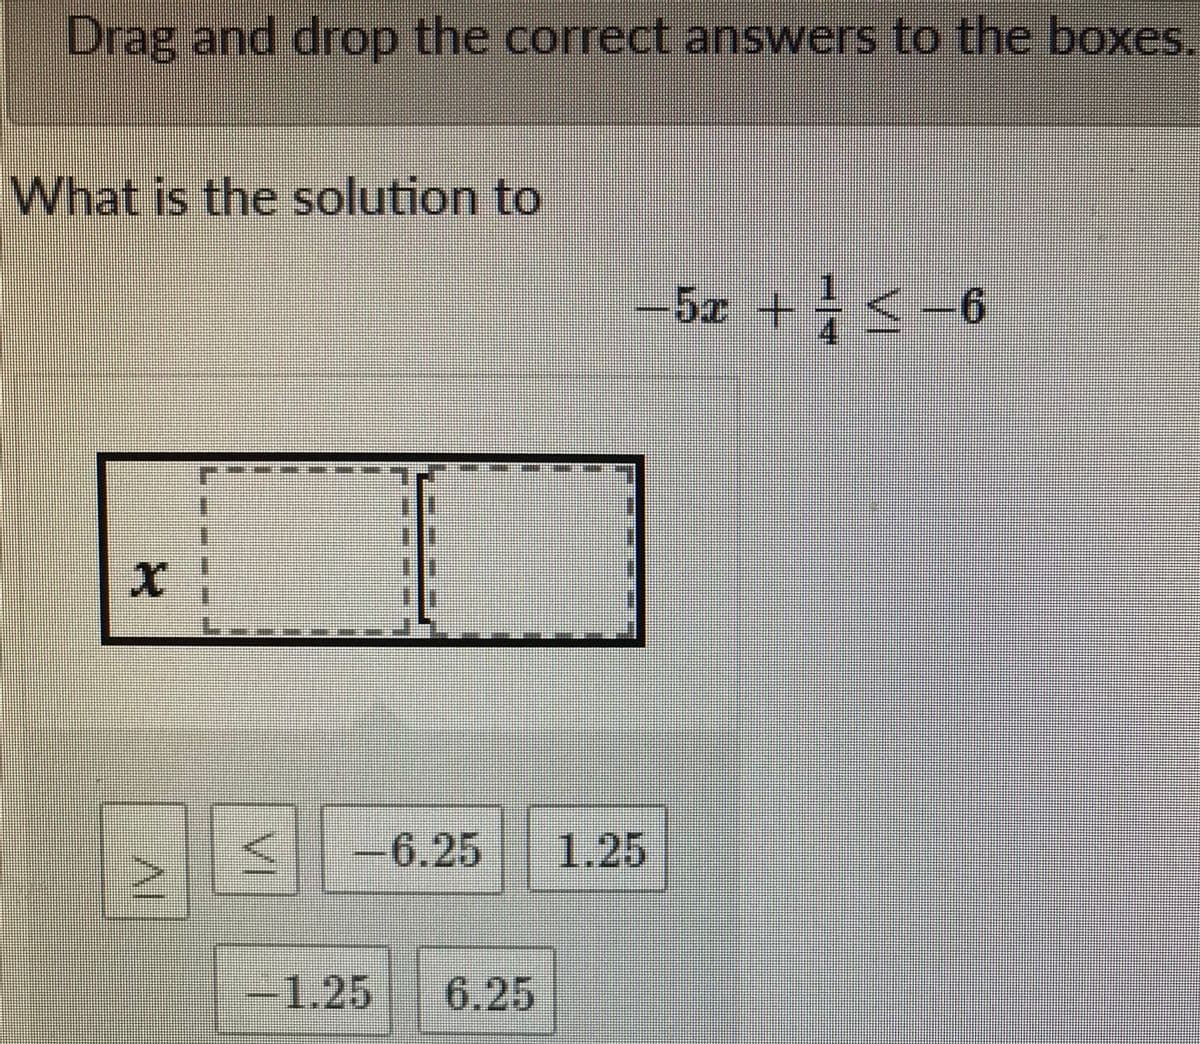 Drag and drop the correct answers to the boxes.
What is the solution to
-5x +<-6
-6.25
1.25
-1.25
6.25
VI
